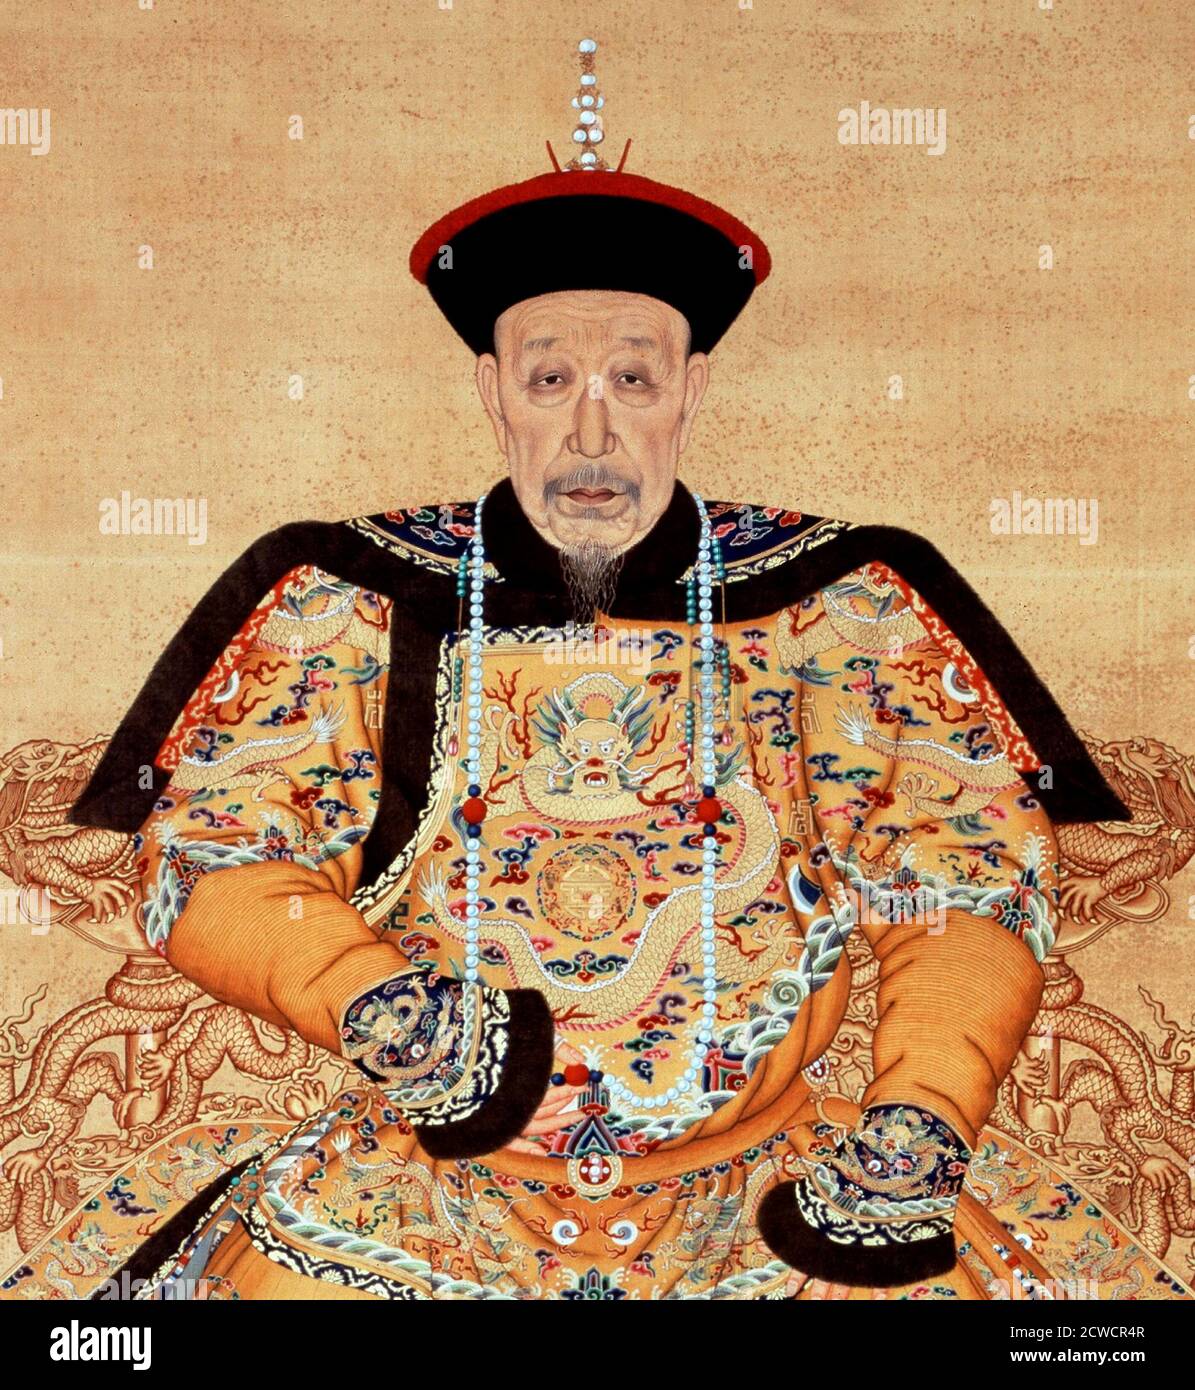 Portrait of the Qianlong Emperor in Court Robe, ink on paper, 1791. The Qianlong Emperor (1711-1799) was the 6th Emperor of the Qing Dynasty in China Stock Photo